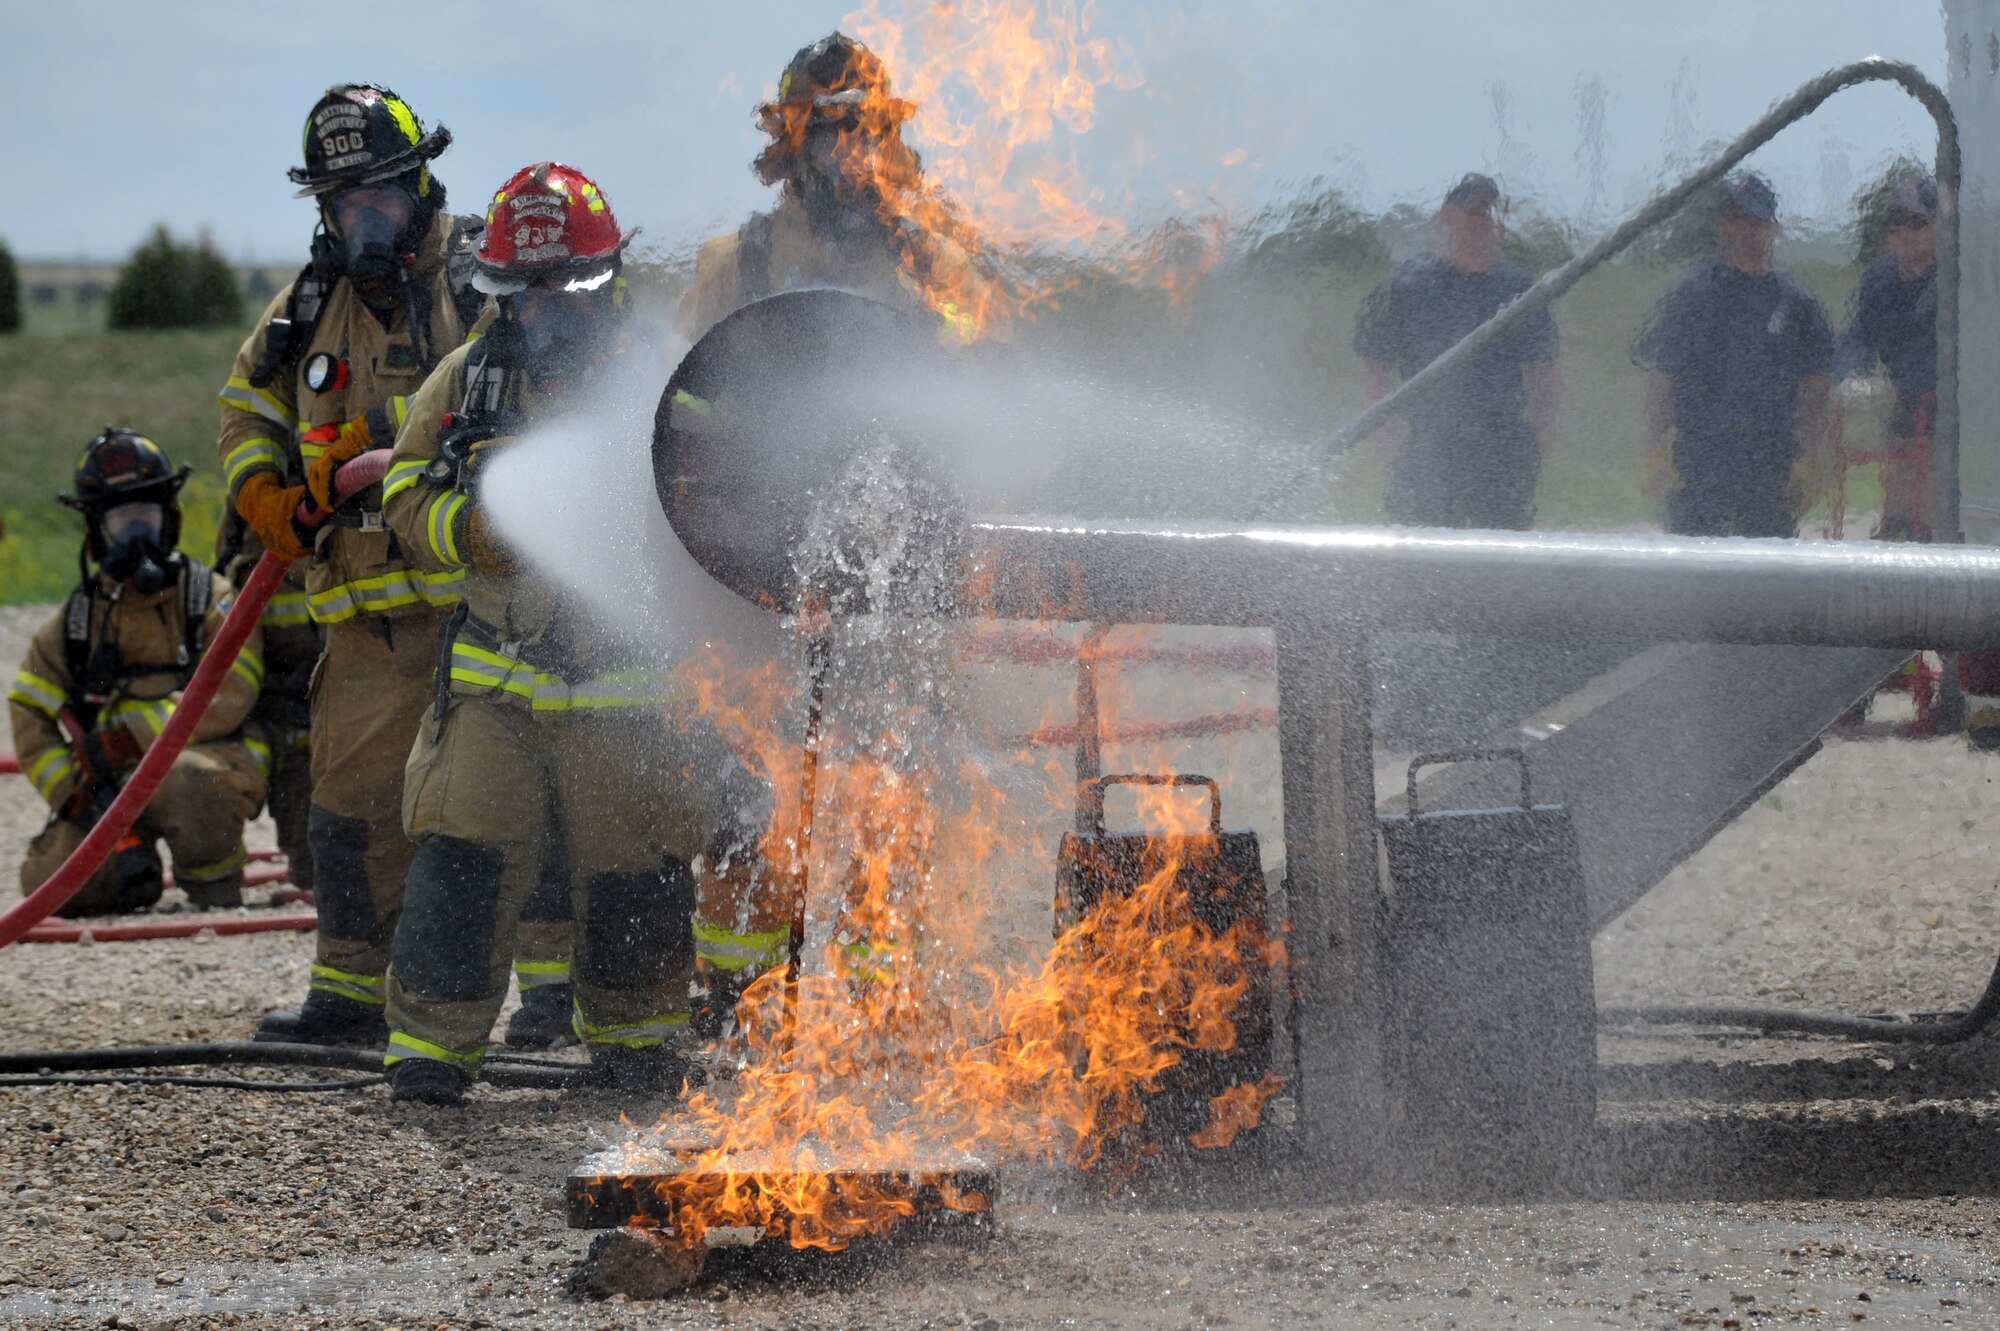 BUCKLEY AIR FORCE BASE, Colo.-- Members of the Aurora and Buckley Fire Departments put out a fire during a training exercise May 30, 2012. The training not only benefits Buckley, but local fire departments as well. (U.S. Air Force photo by Airman 1st Class Darryl Bolden Jr.)
